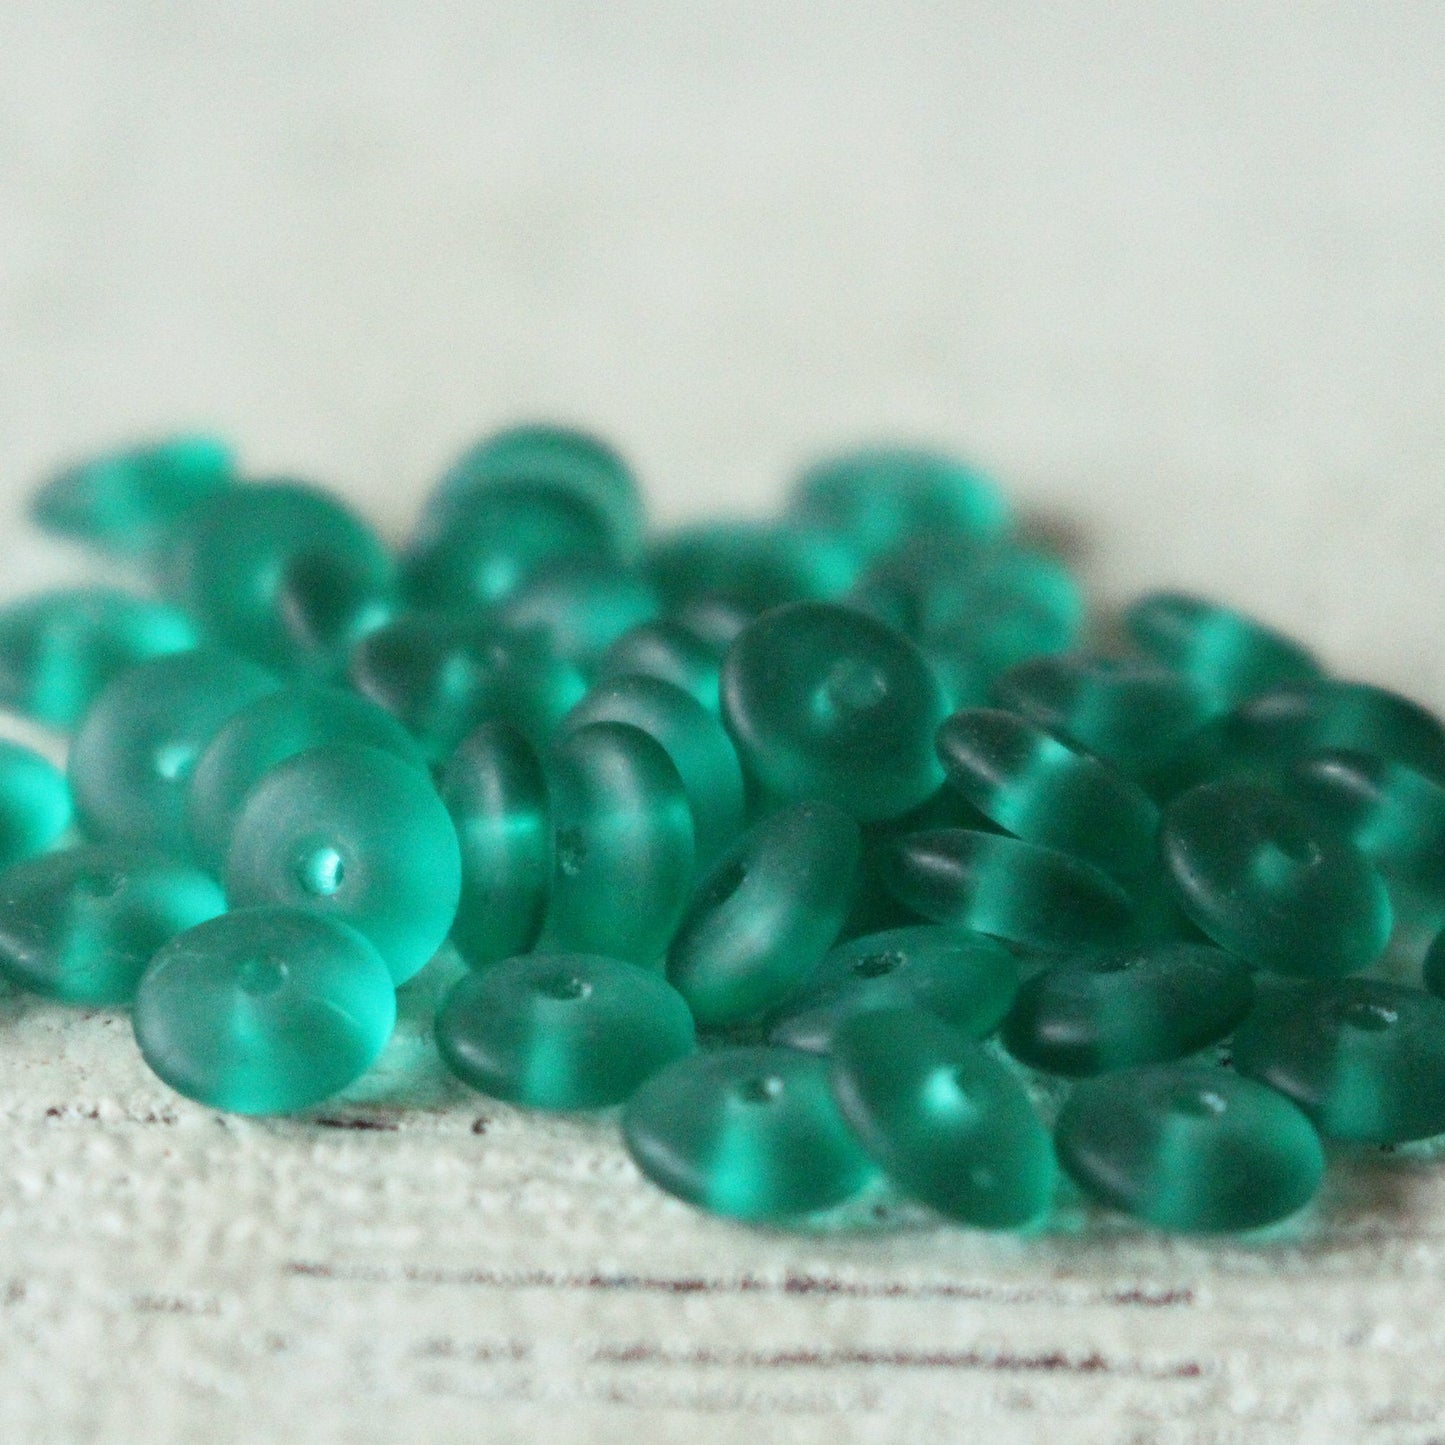 6mm Rondelle Beads - Matte Teal Green - 100 Beads